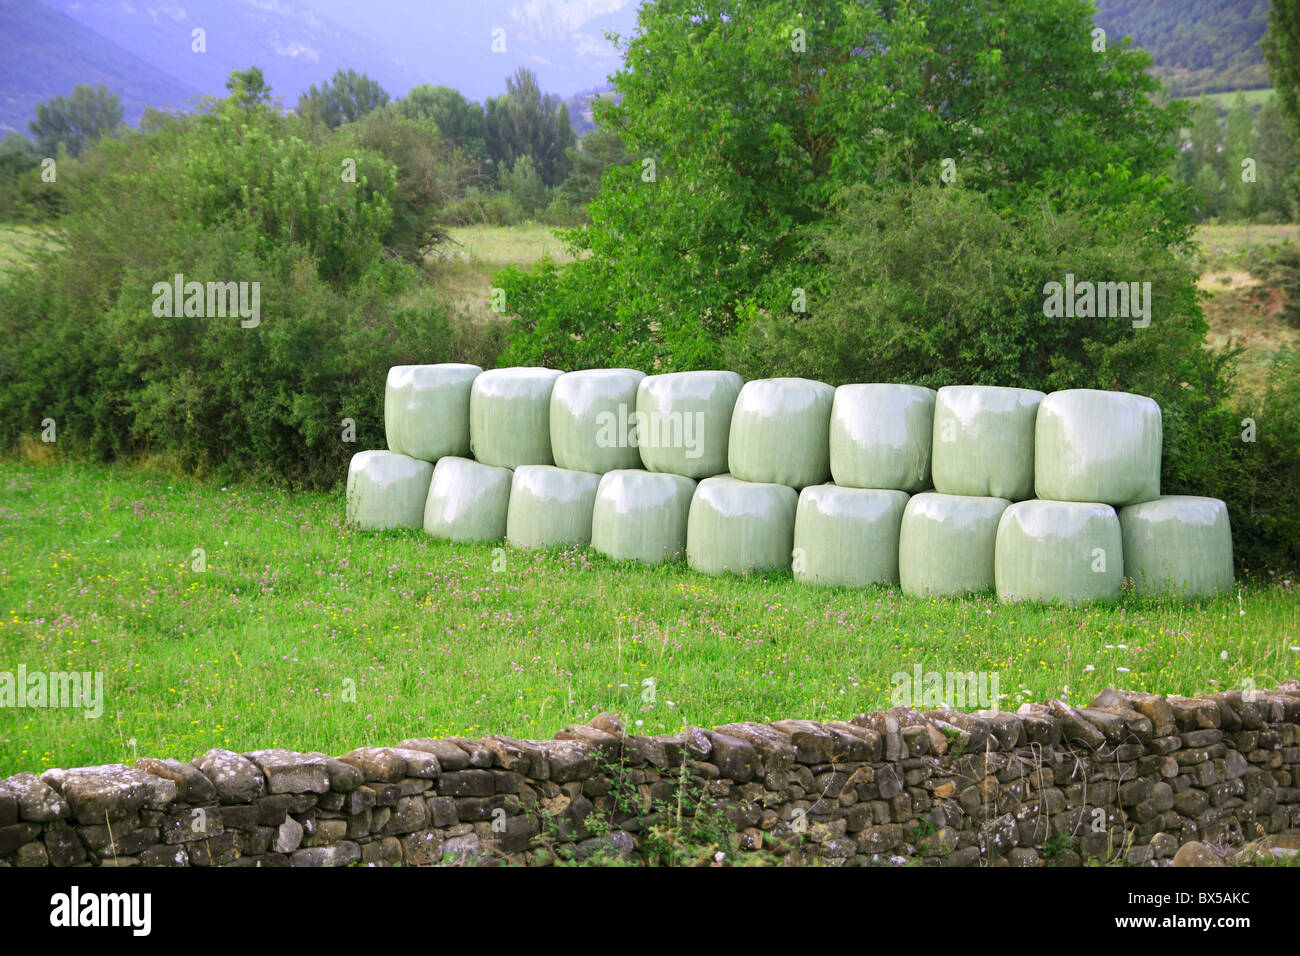 cereal bales round green plastic wrap cover outdoor meadow field Stock Photo